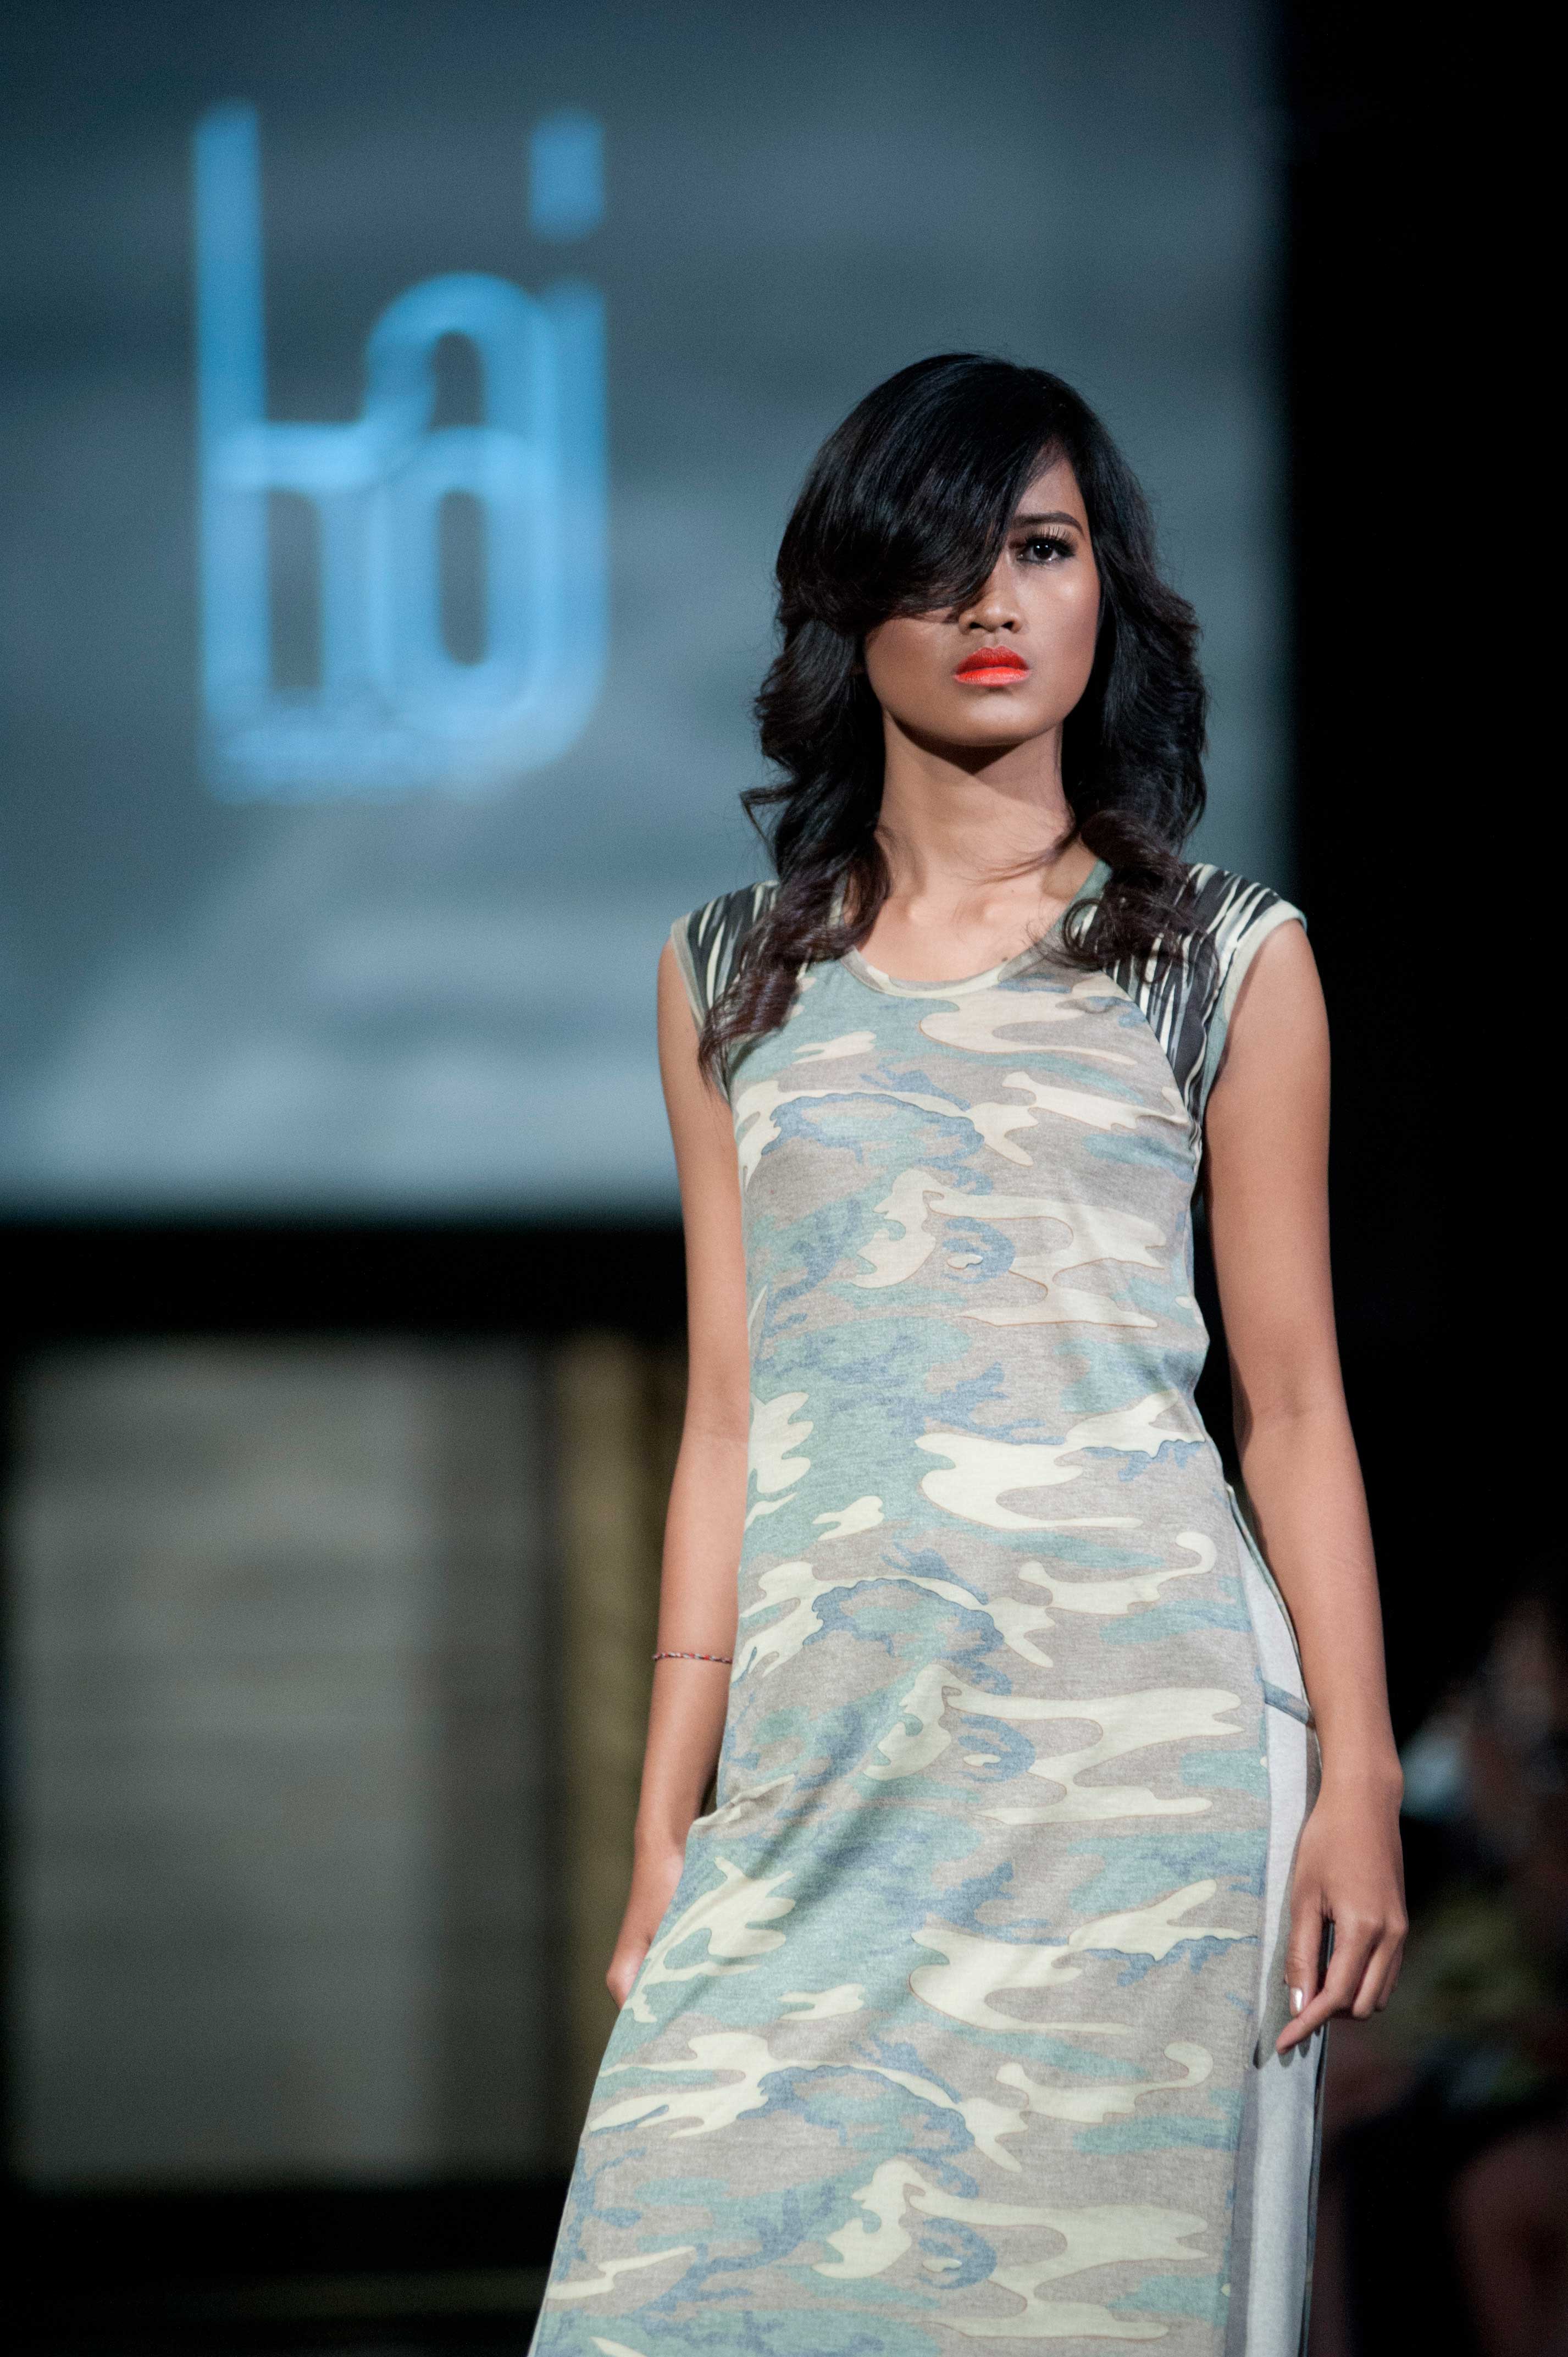 Kaj’s trendsetting camo raglan tunic with daring waist-high side slits, of the Tribu Sauvage resort collection, on the runway at the 2013 Fashion Festival Bali at the Stones Hotel, a Marriott Autograph Collection hotel. Also featured is Kaj’s faux-pocket maxi skirt. Photo courtesy Anggara Mahendra.